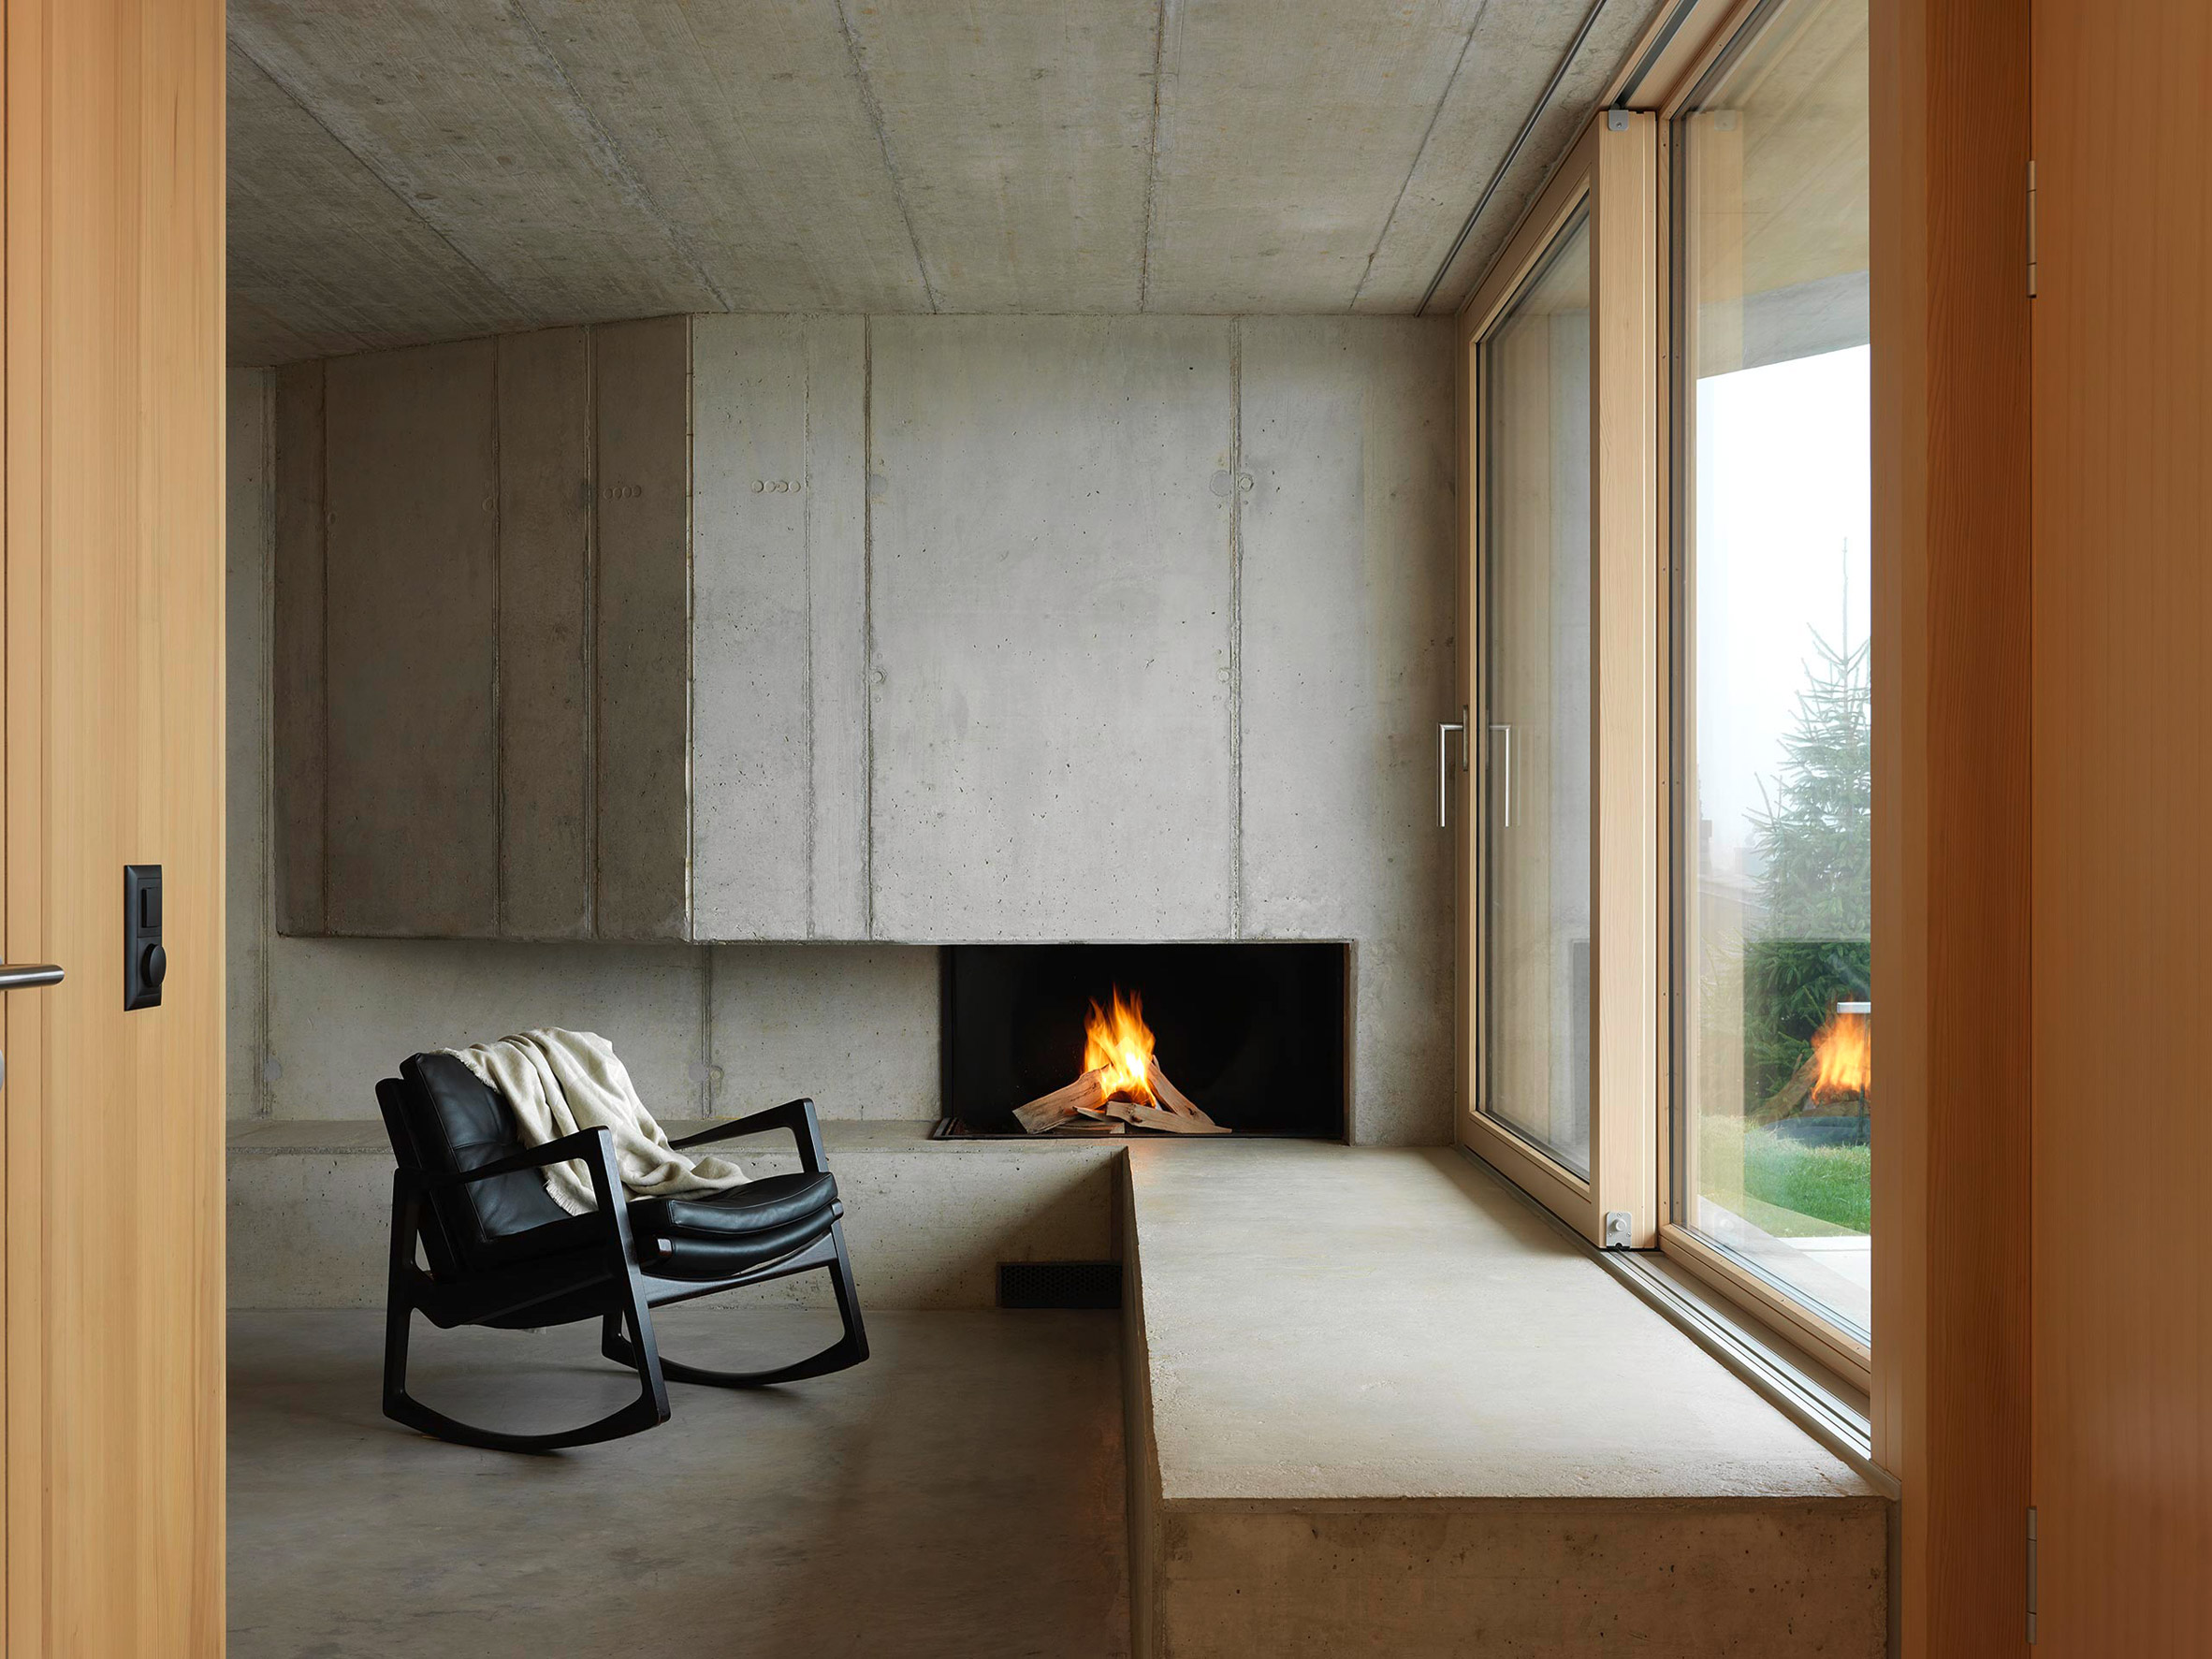 Concrete interiors with built in fireplace